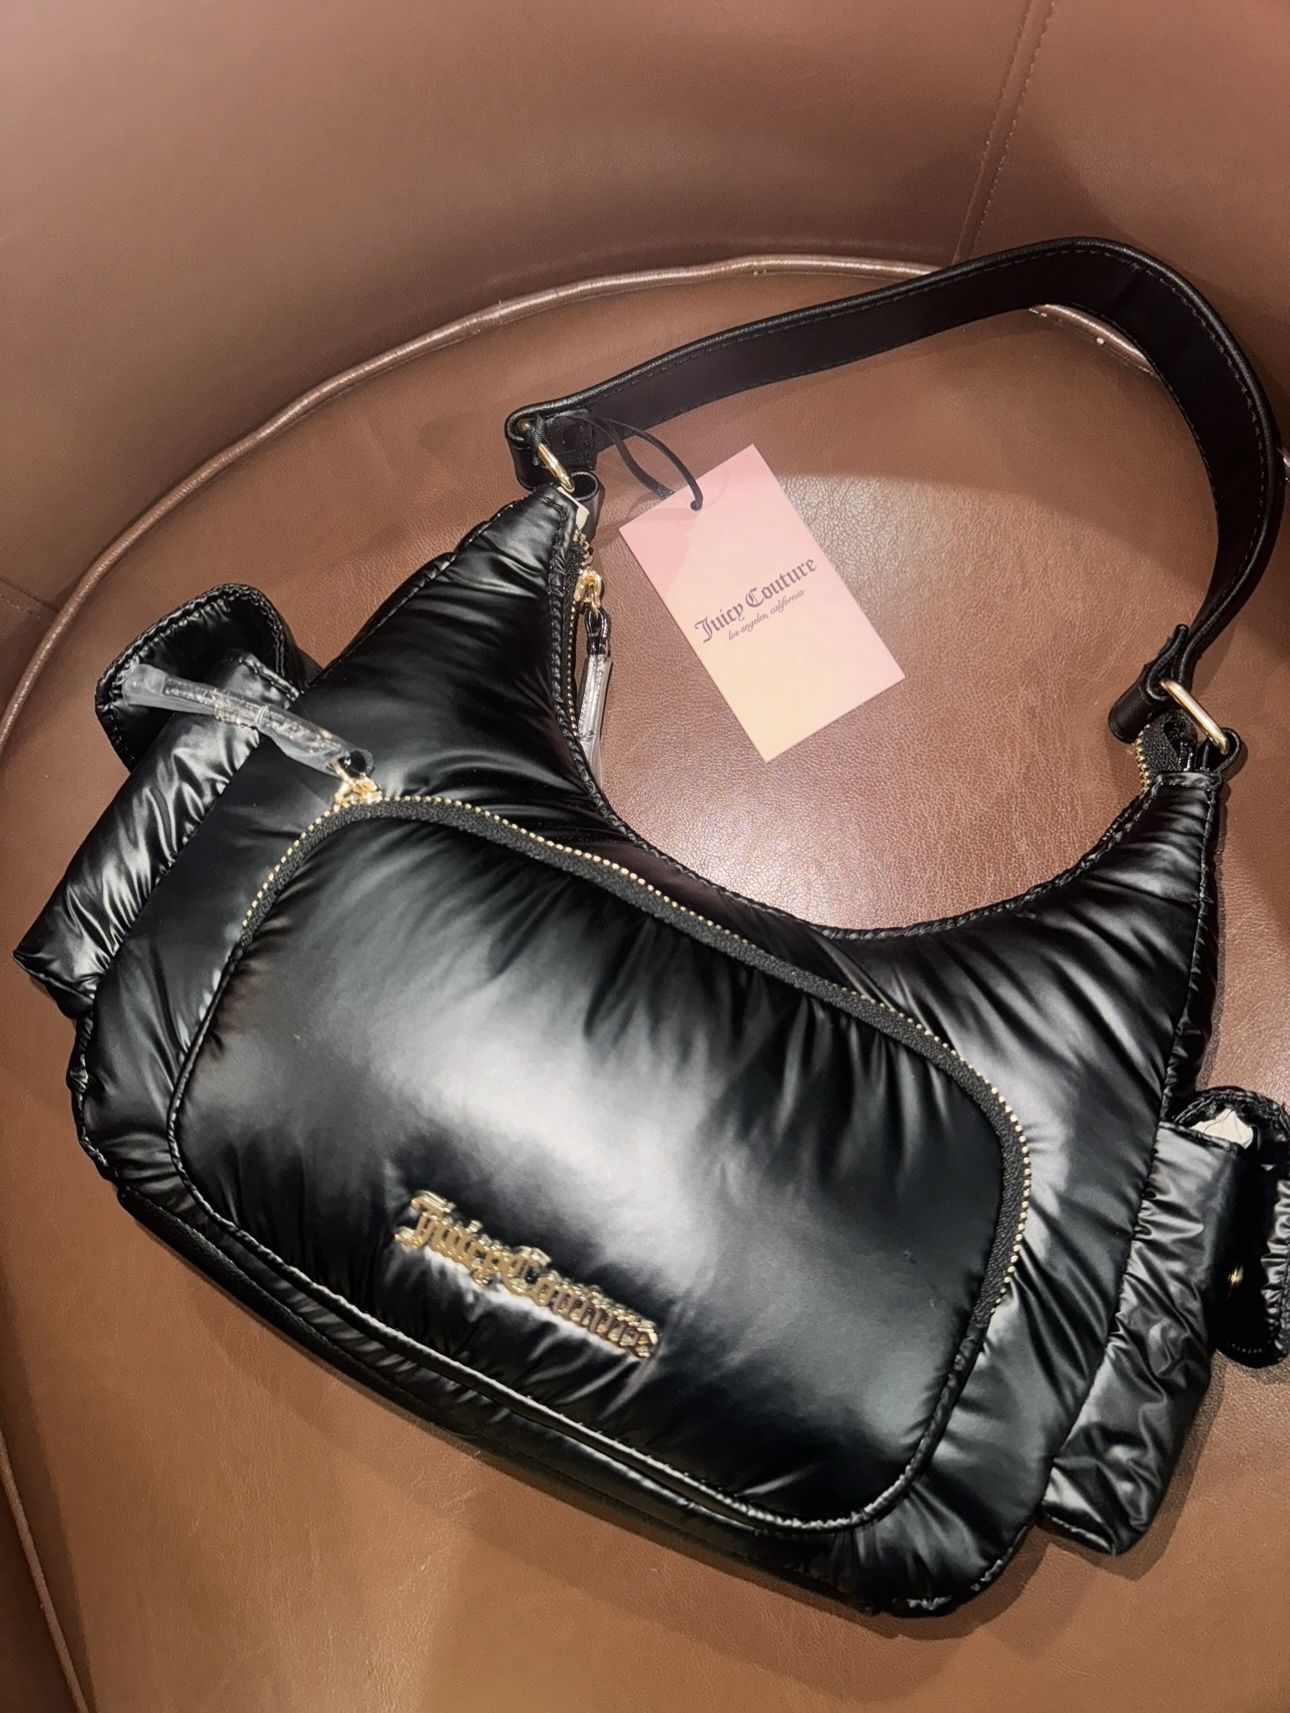 New Juicy Couture Black Puffer Bag